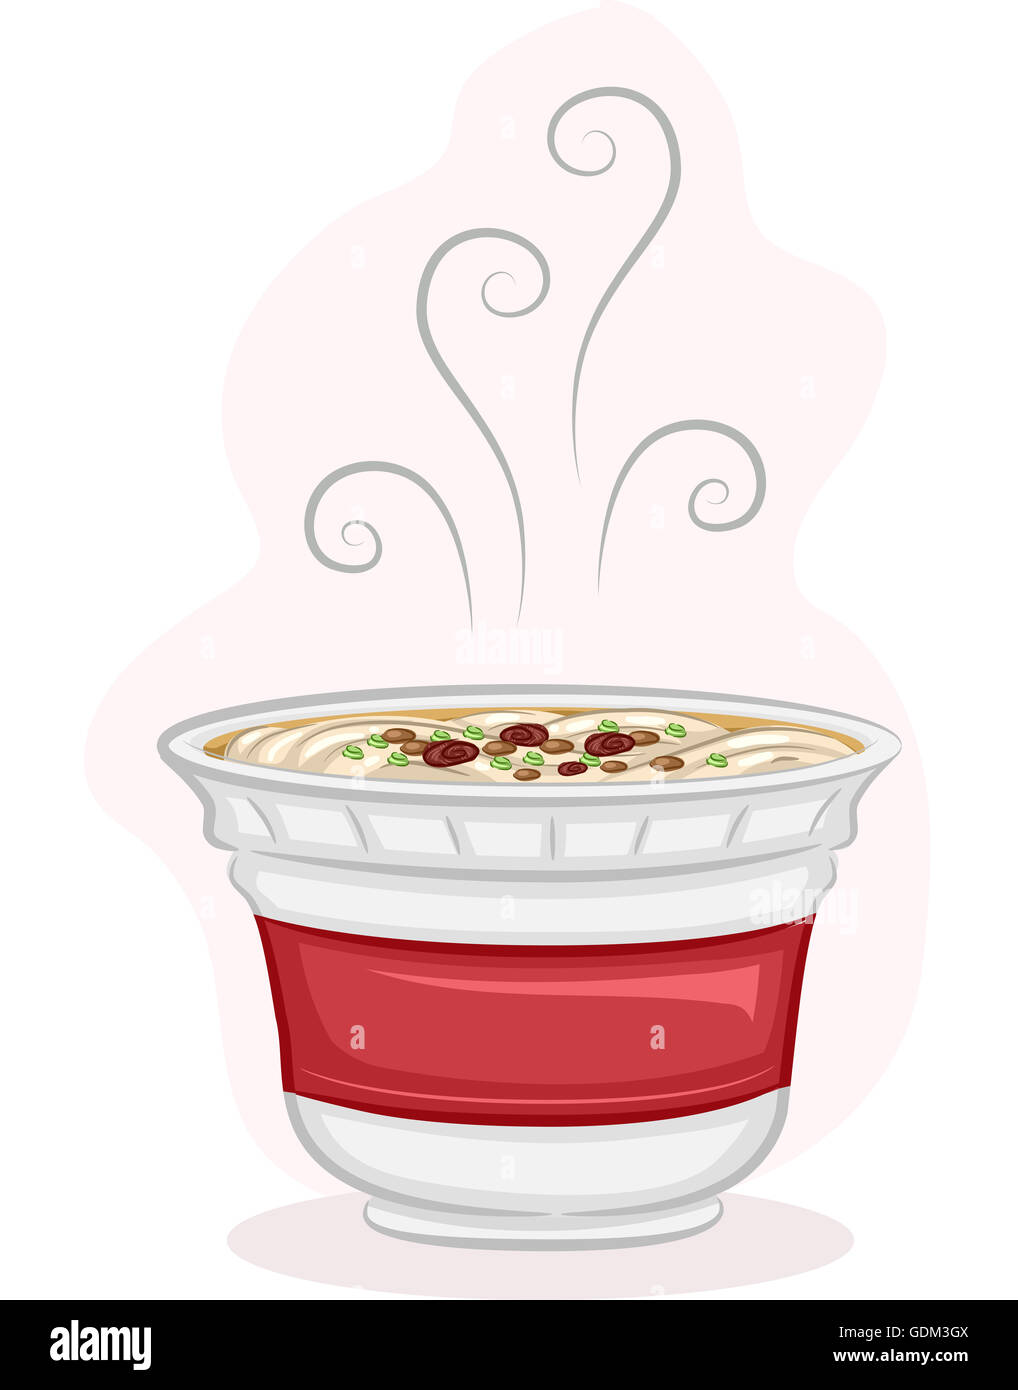 Illustration of a Steaming Cup of Instant Noodles Stock Photo